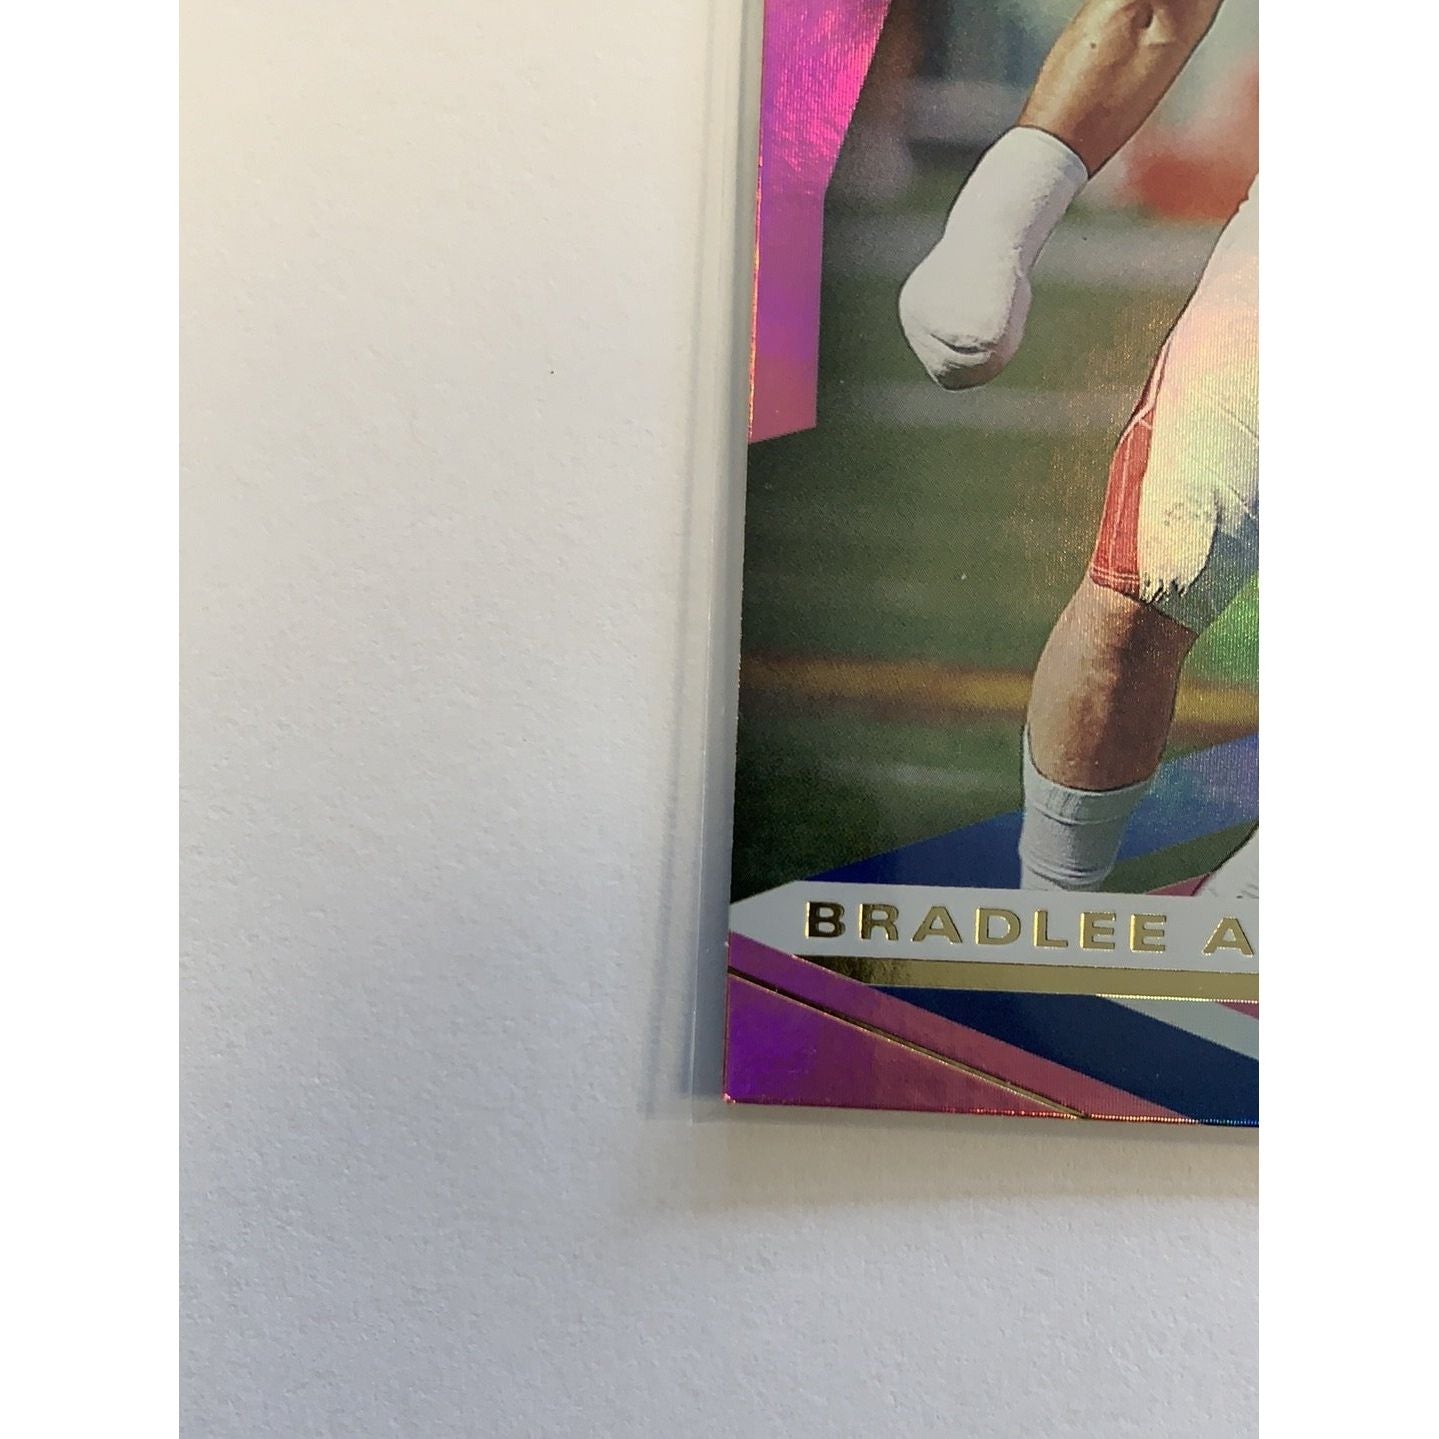  2020 Donruss Elite Bradlee Anae RC Pink Parallel DAMAGED  Local Legends Cards & Collectibles